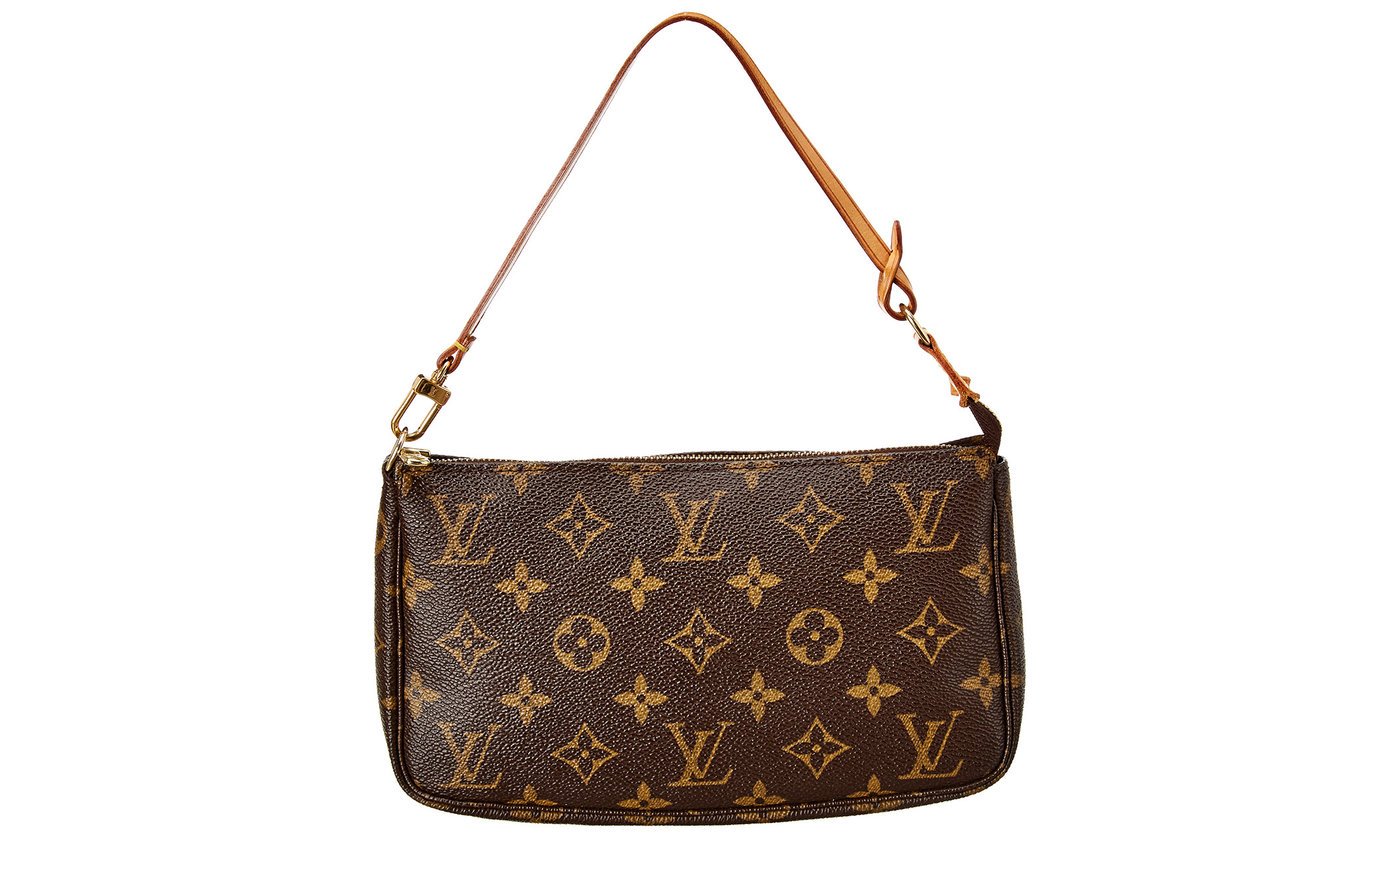 You could get this Louis Vuitton pochette for as less as $450 : Luxurylaunches